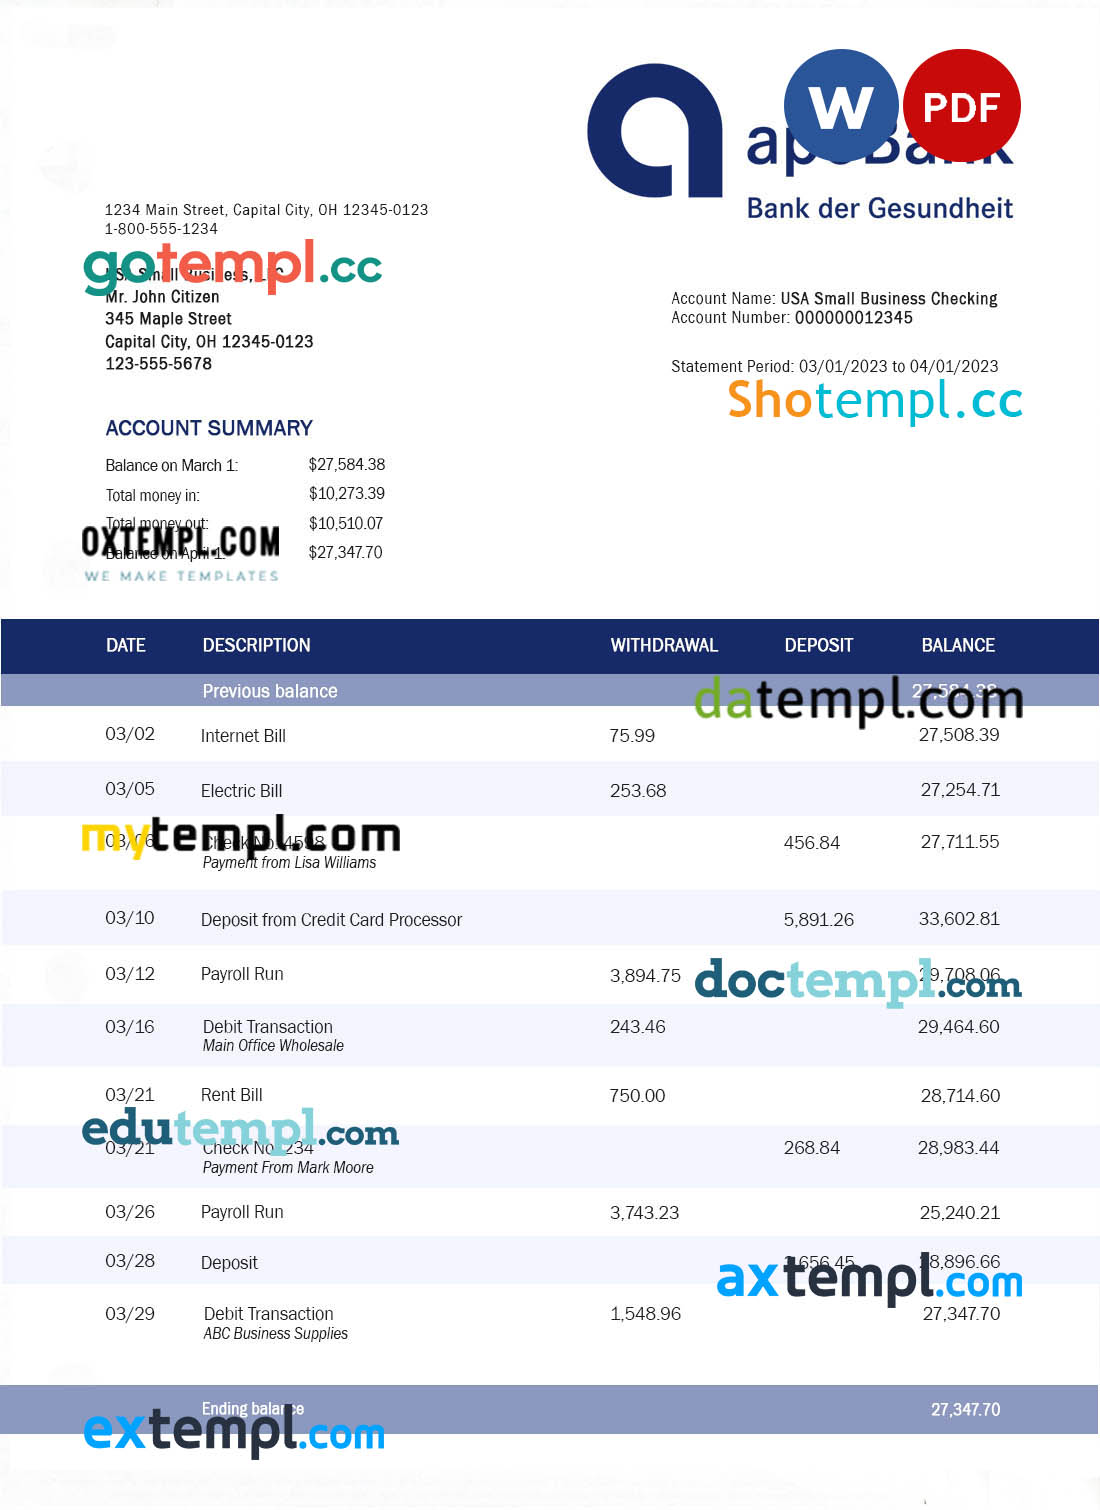 editable template, Apobank enterprise account statement Word and PDF template